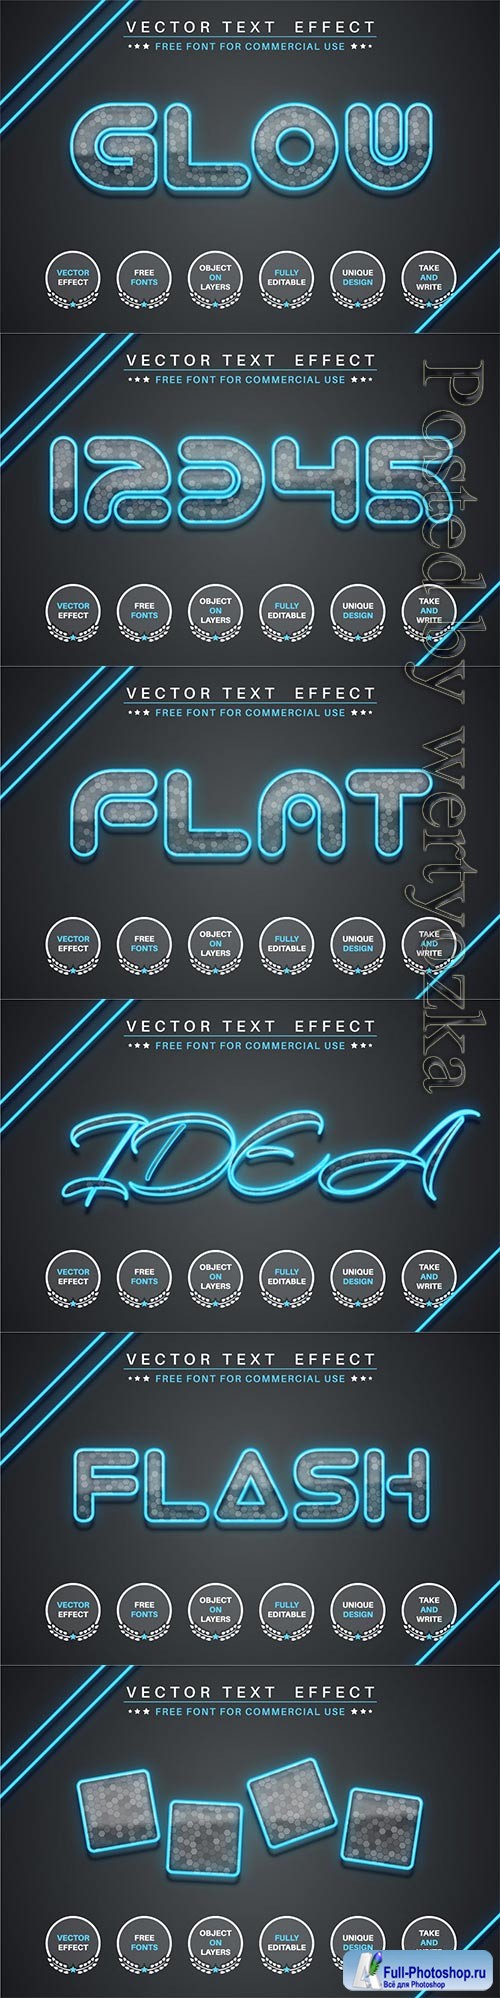 Flash glass - editable text effect, font style